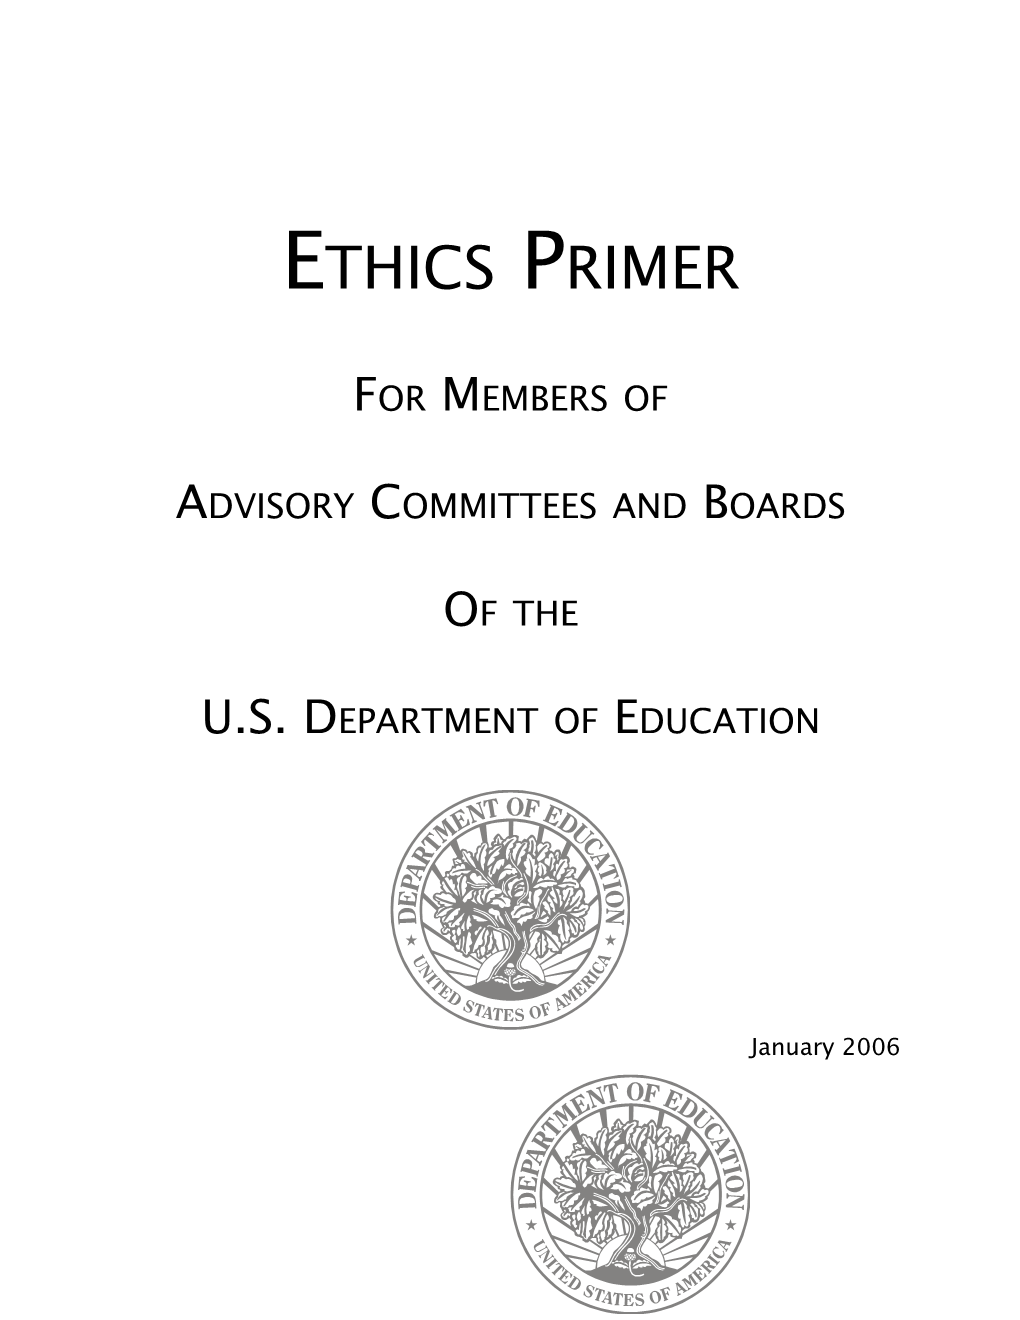 Ethics Primer for Members of Advisory Committees and Boards of the U.S. Department of Education